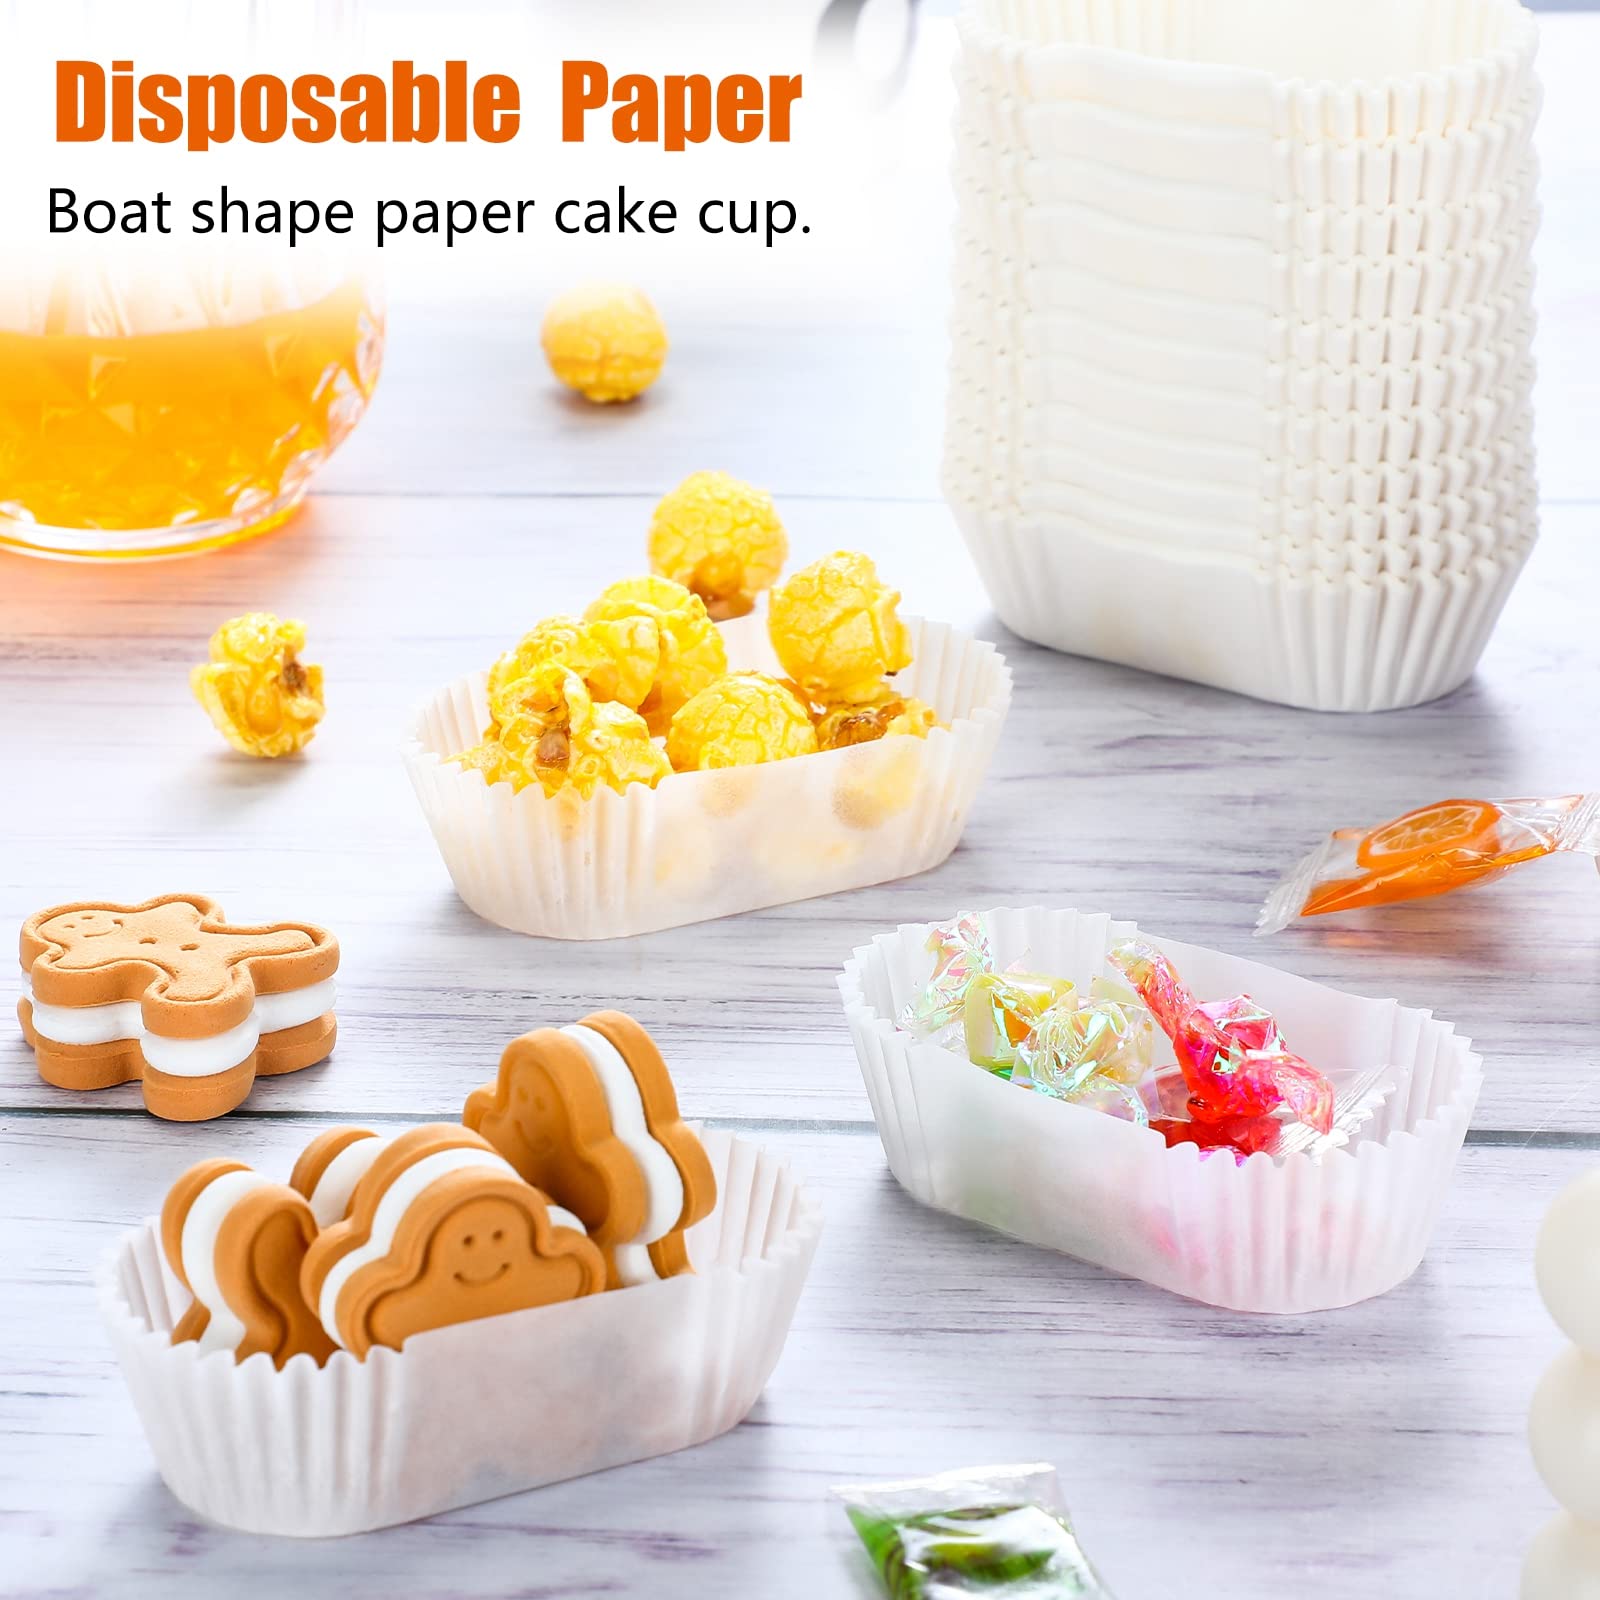 2000 Pieces Oval Cake Paper Tray Baking Cup White Cupcake Papers Mini Loaf Pan Liners Muffin Cups Paper Liners High Temperature Cake Cup Grease Proof Cupcake Liners for Cupcake Muffin Bread